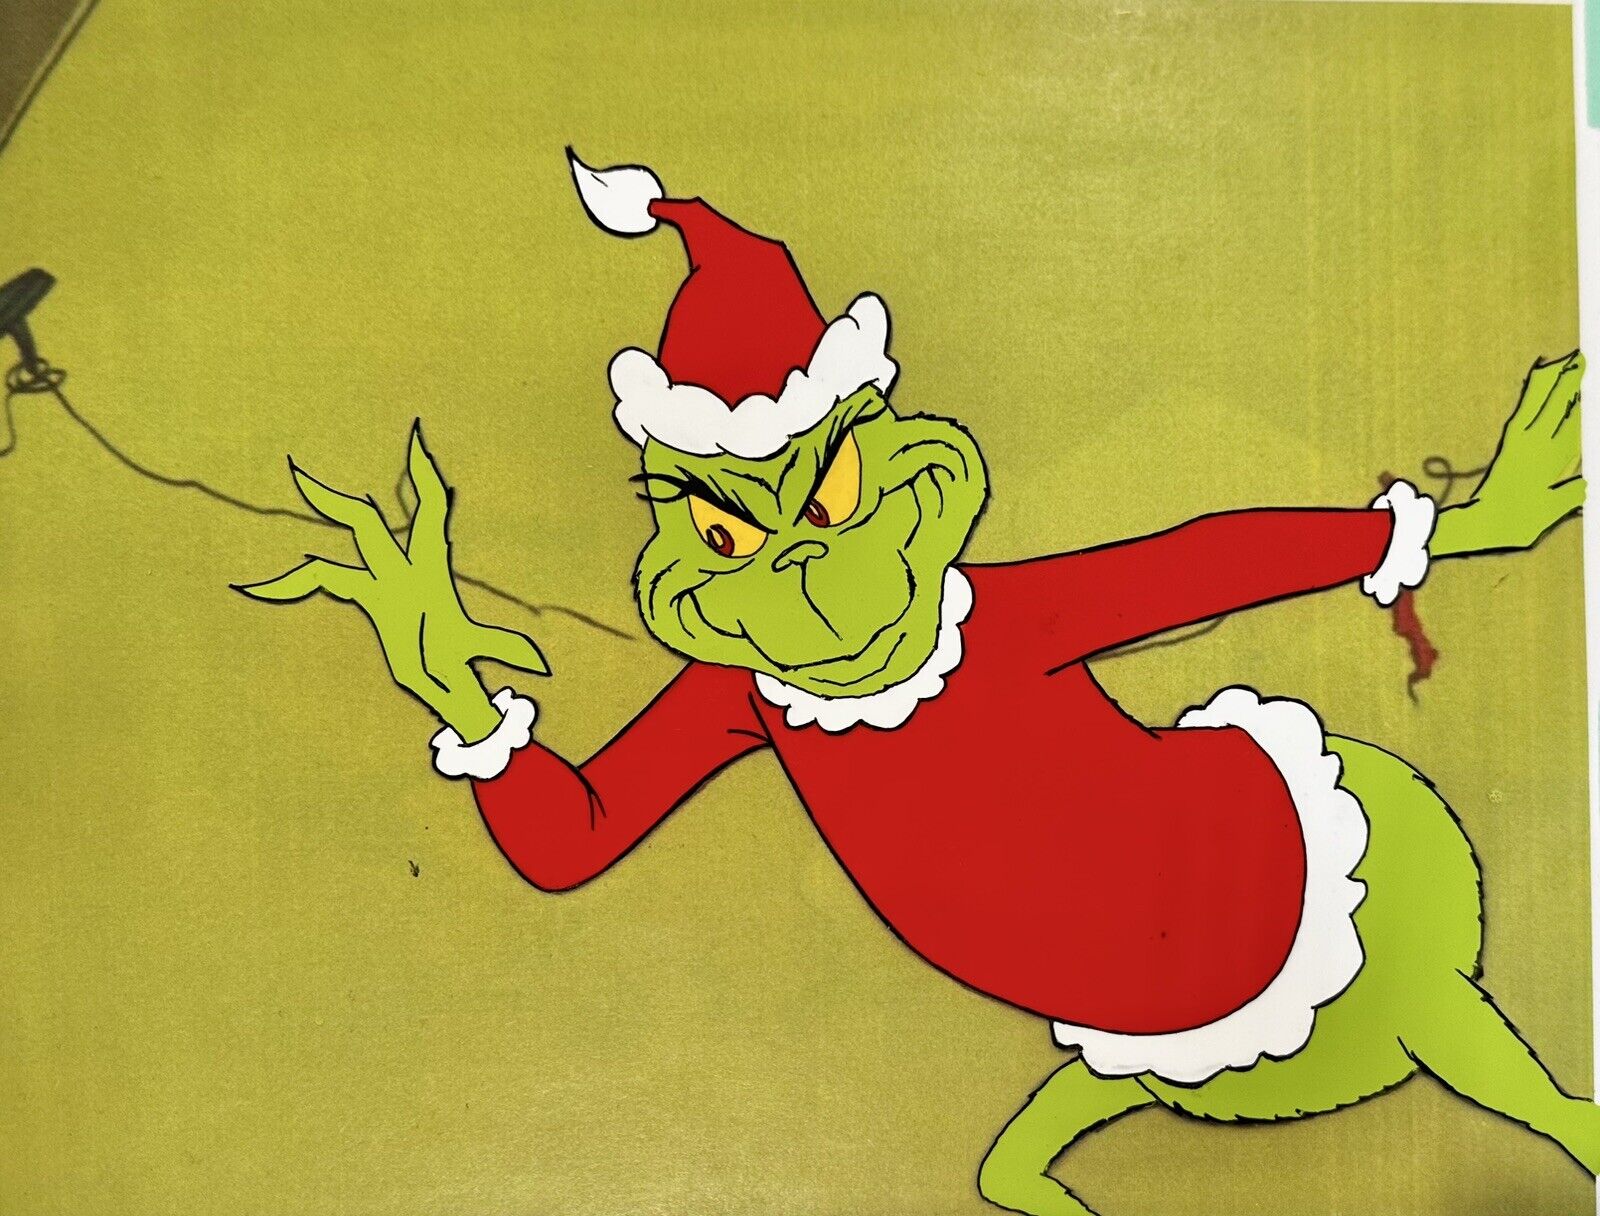 The Grinch “ How The Grinch Stole Christmas”